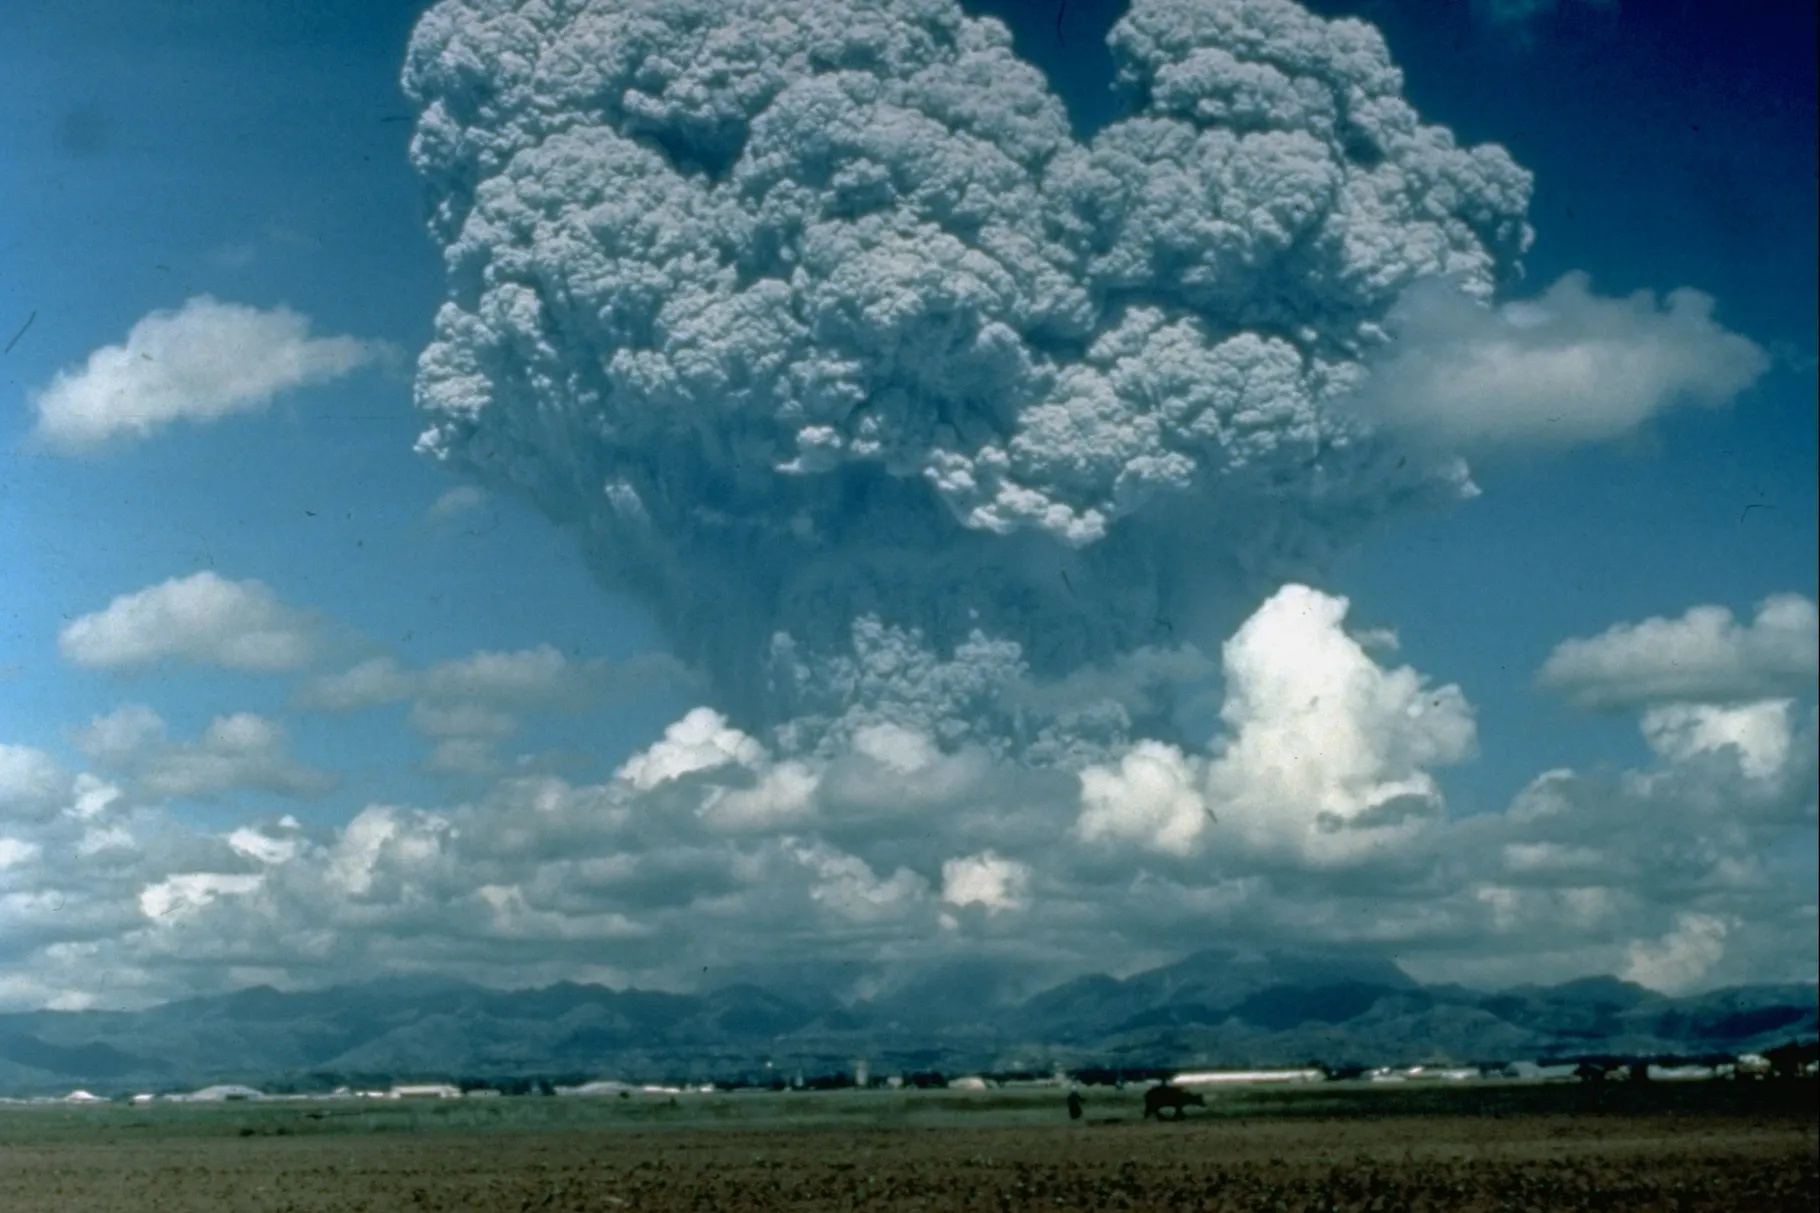 The eruption of Mount Pinatubo in 1991 sent at least 17 million metric tons of sulfur dioxide into the atmosphere, which cooled the Earth by roughly 0.5 degree Celsius (0.9 degree Fahrenheit) for about a year. (Photo by David H. Harlow, USGS)